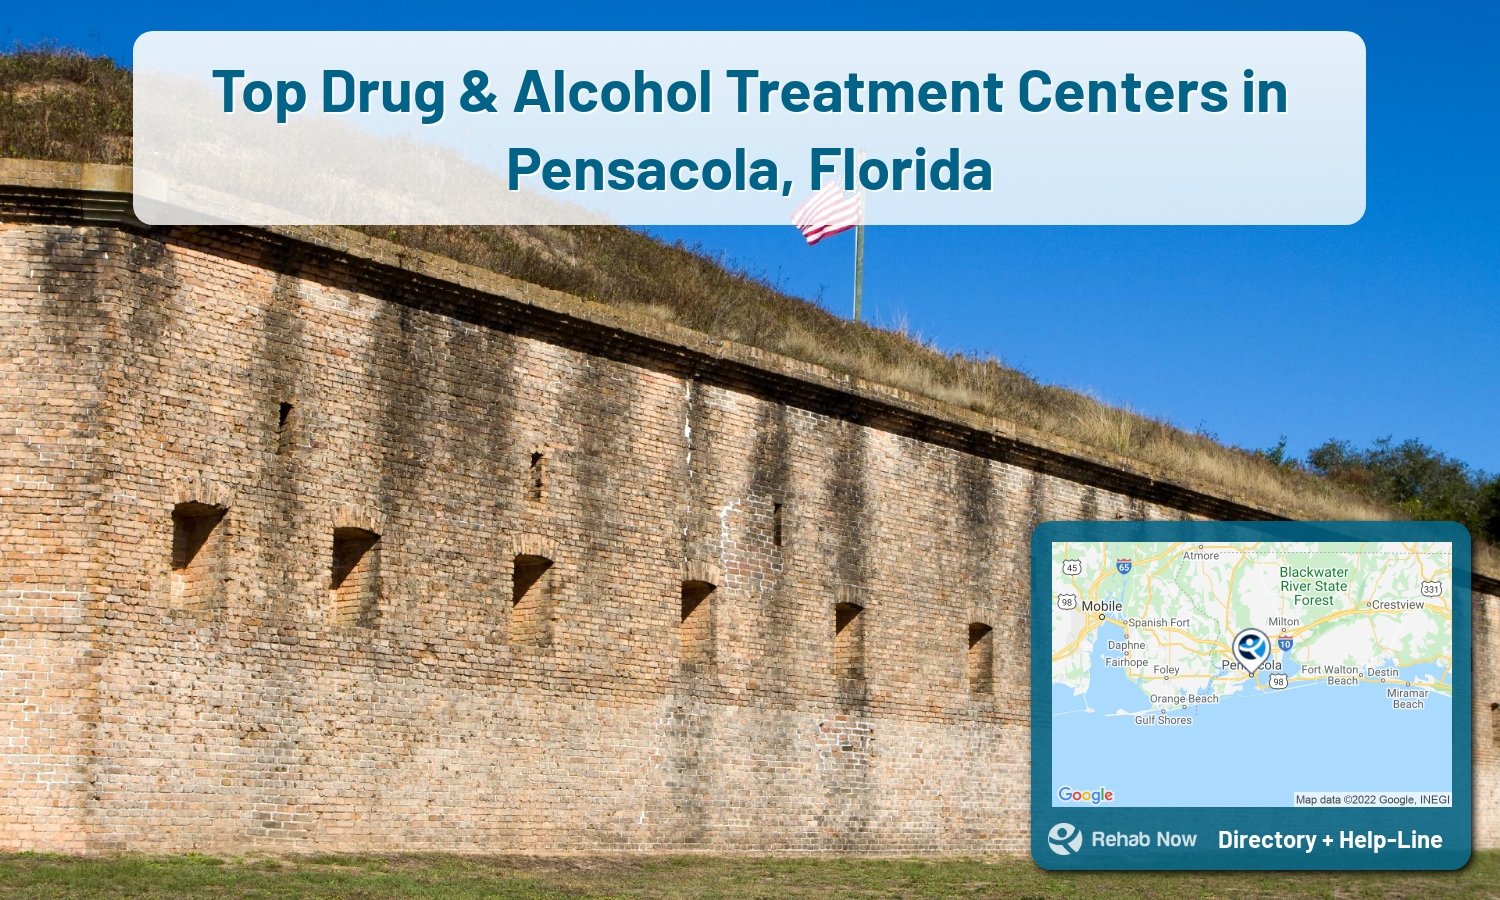 Ready to pick a rehab center in Pensacola? Get off alcohol, opiates, and other drugs, by selecting top drug rehab centers in Florida